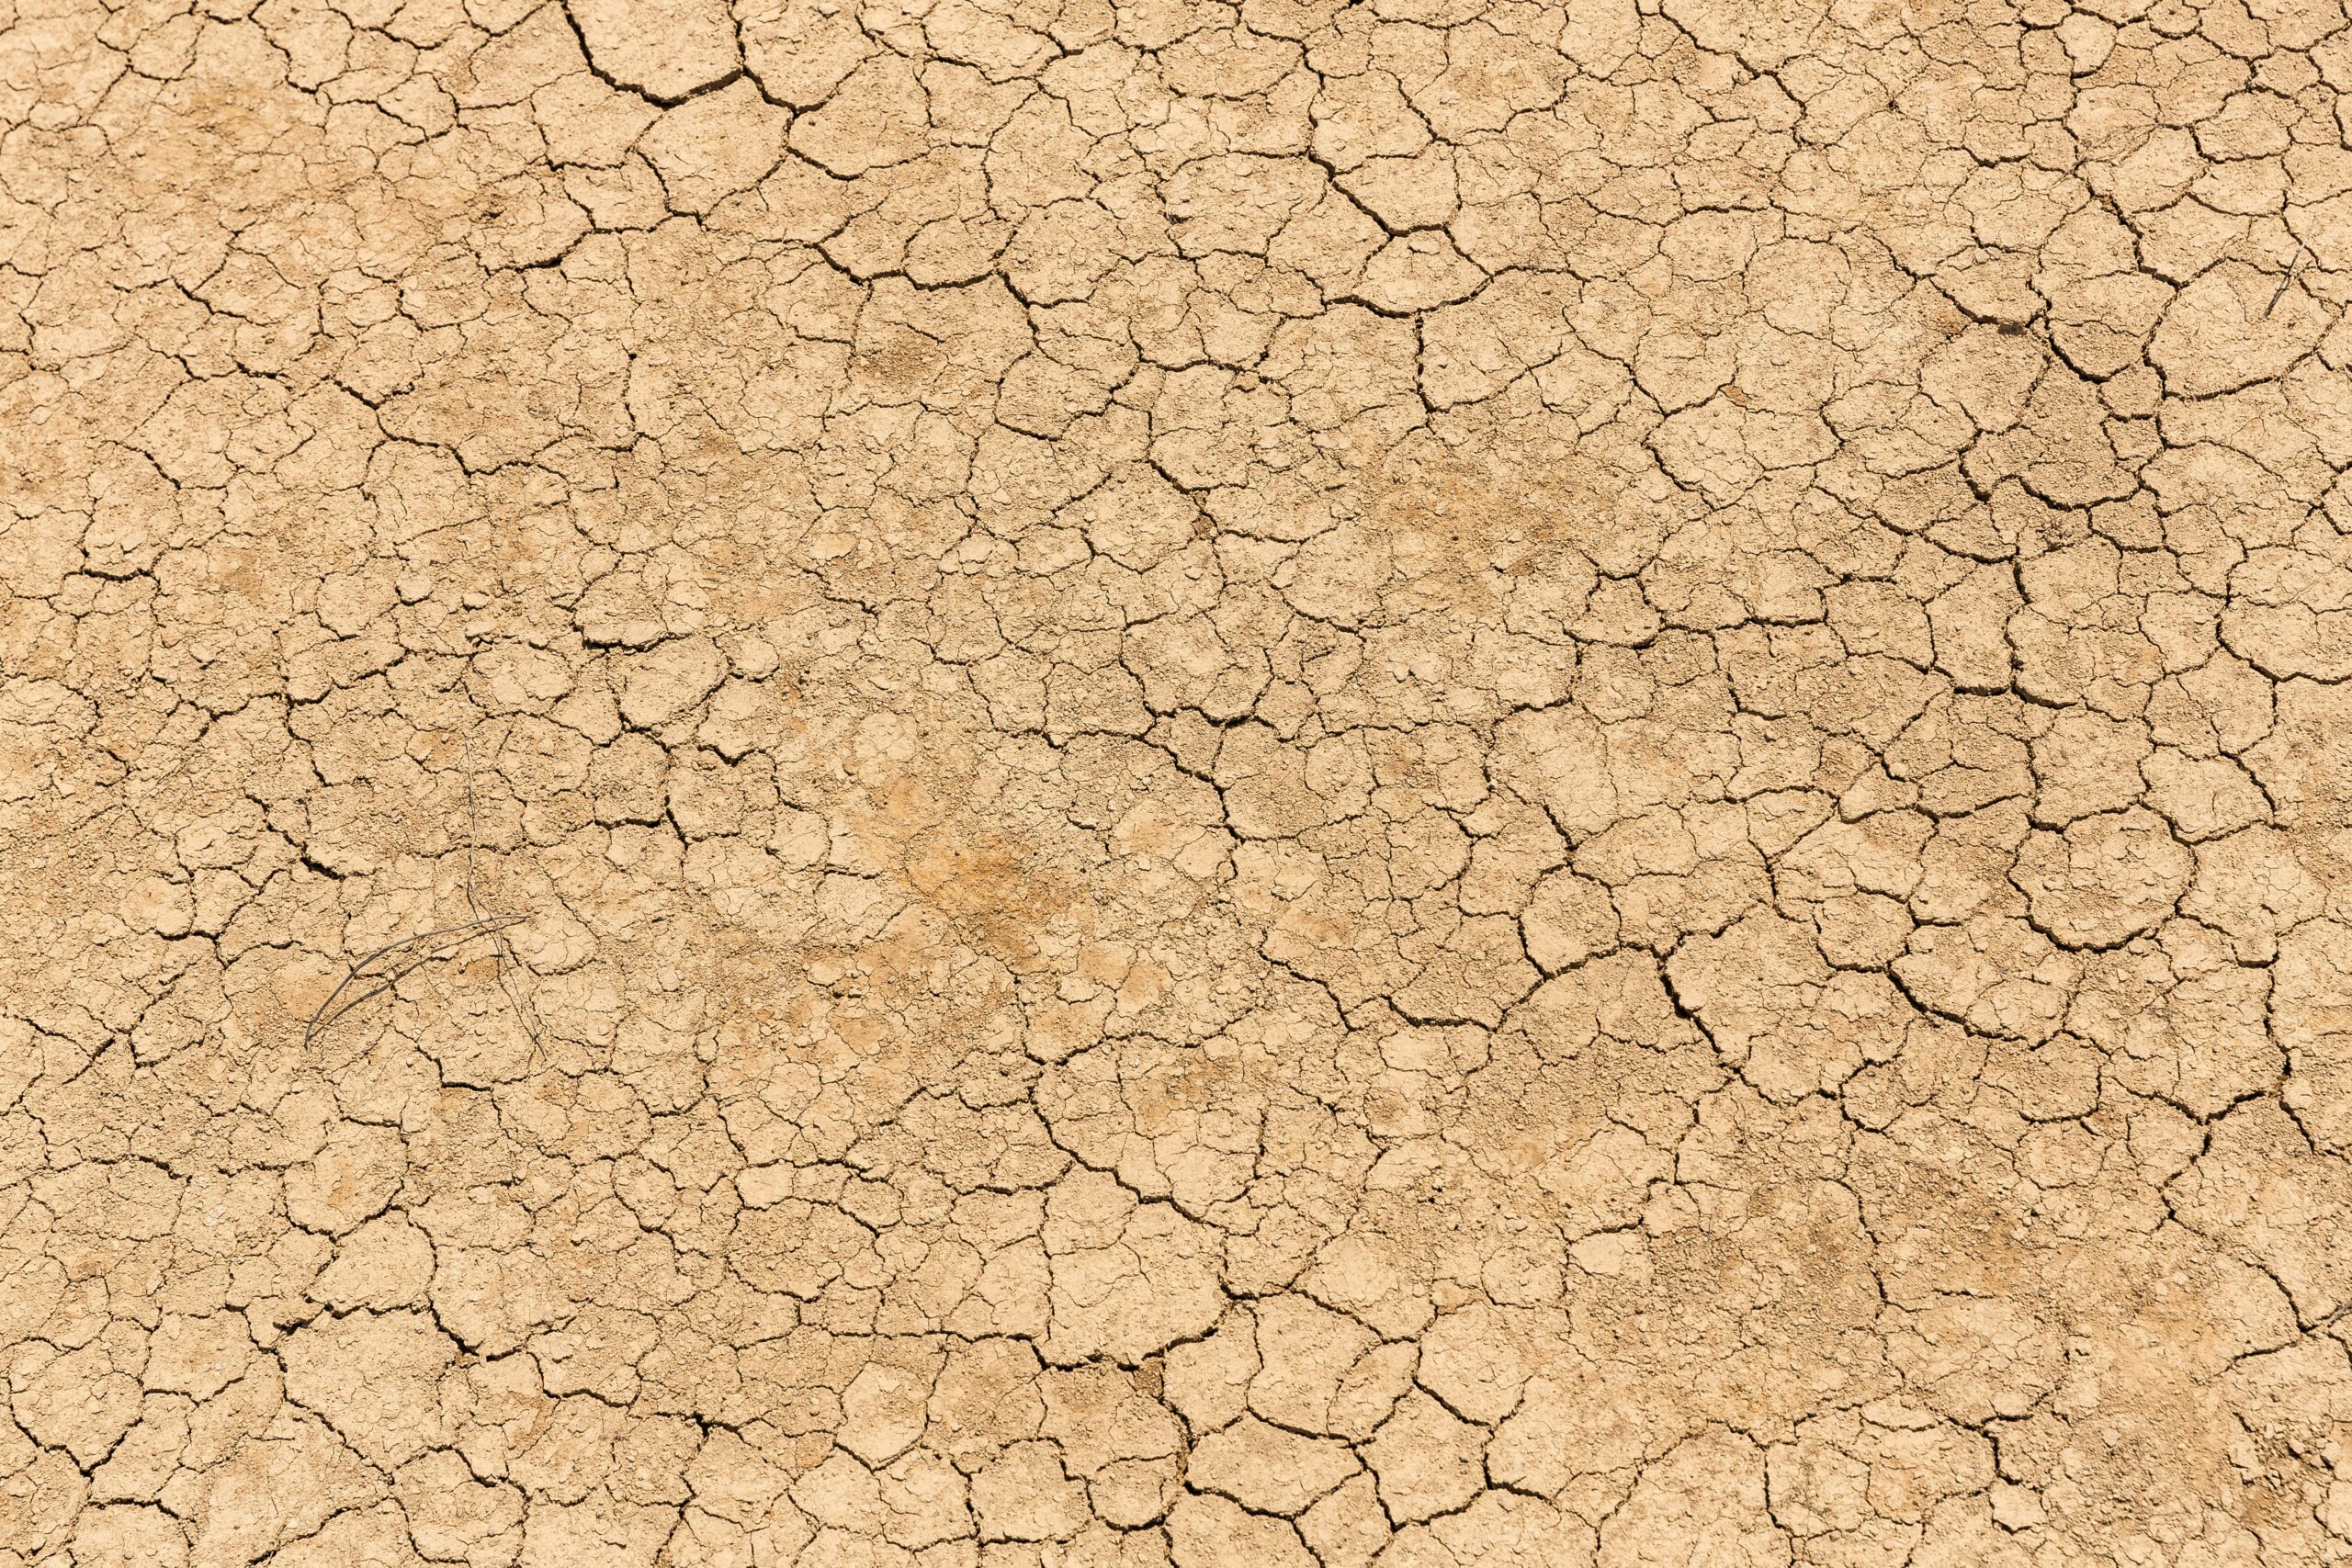 How Should I Prepare For A Severe Drought Emergency?